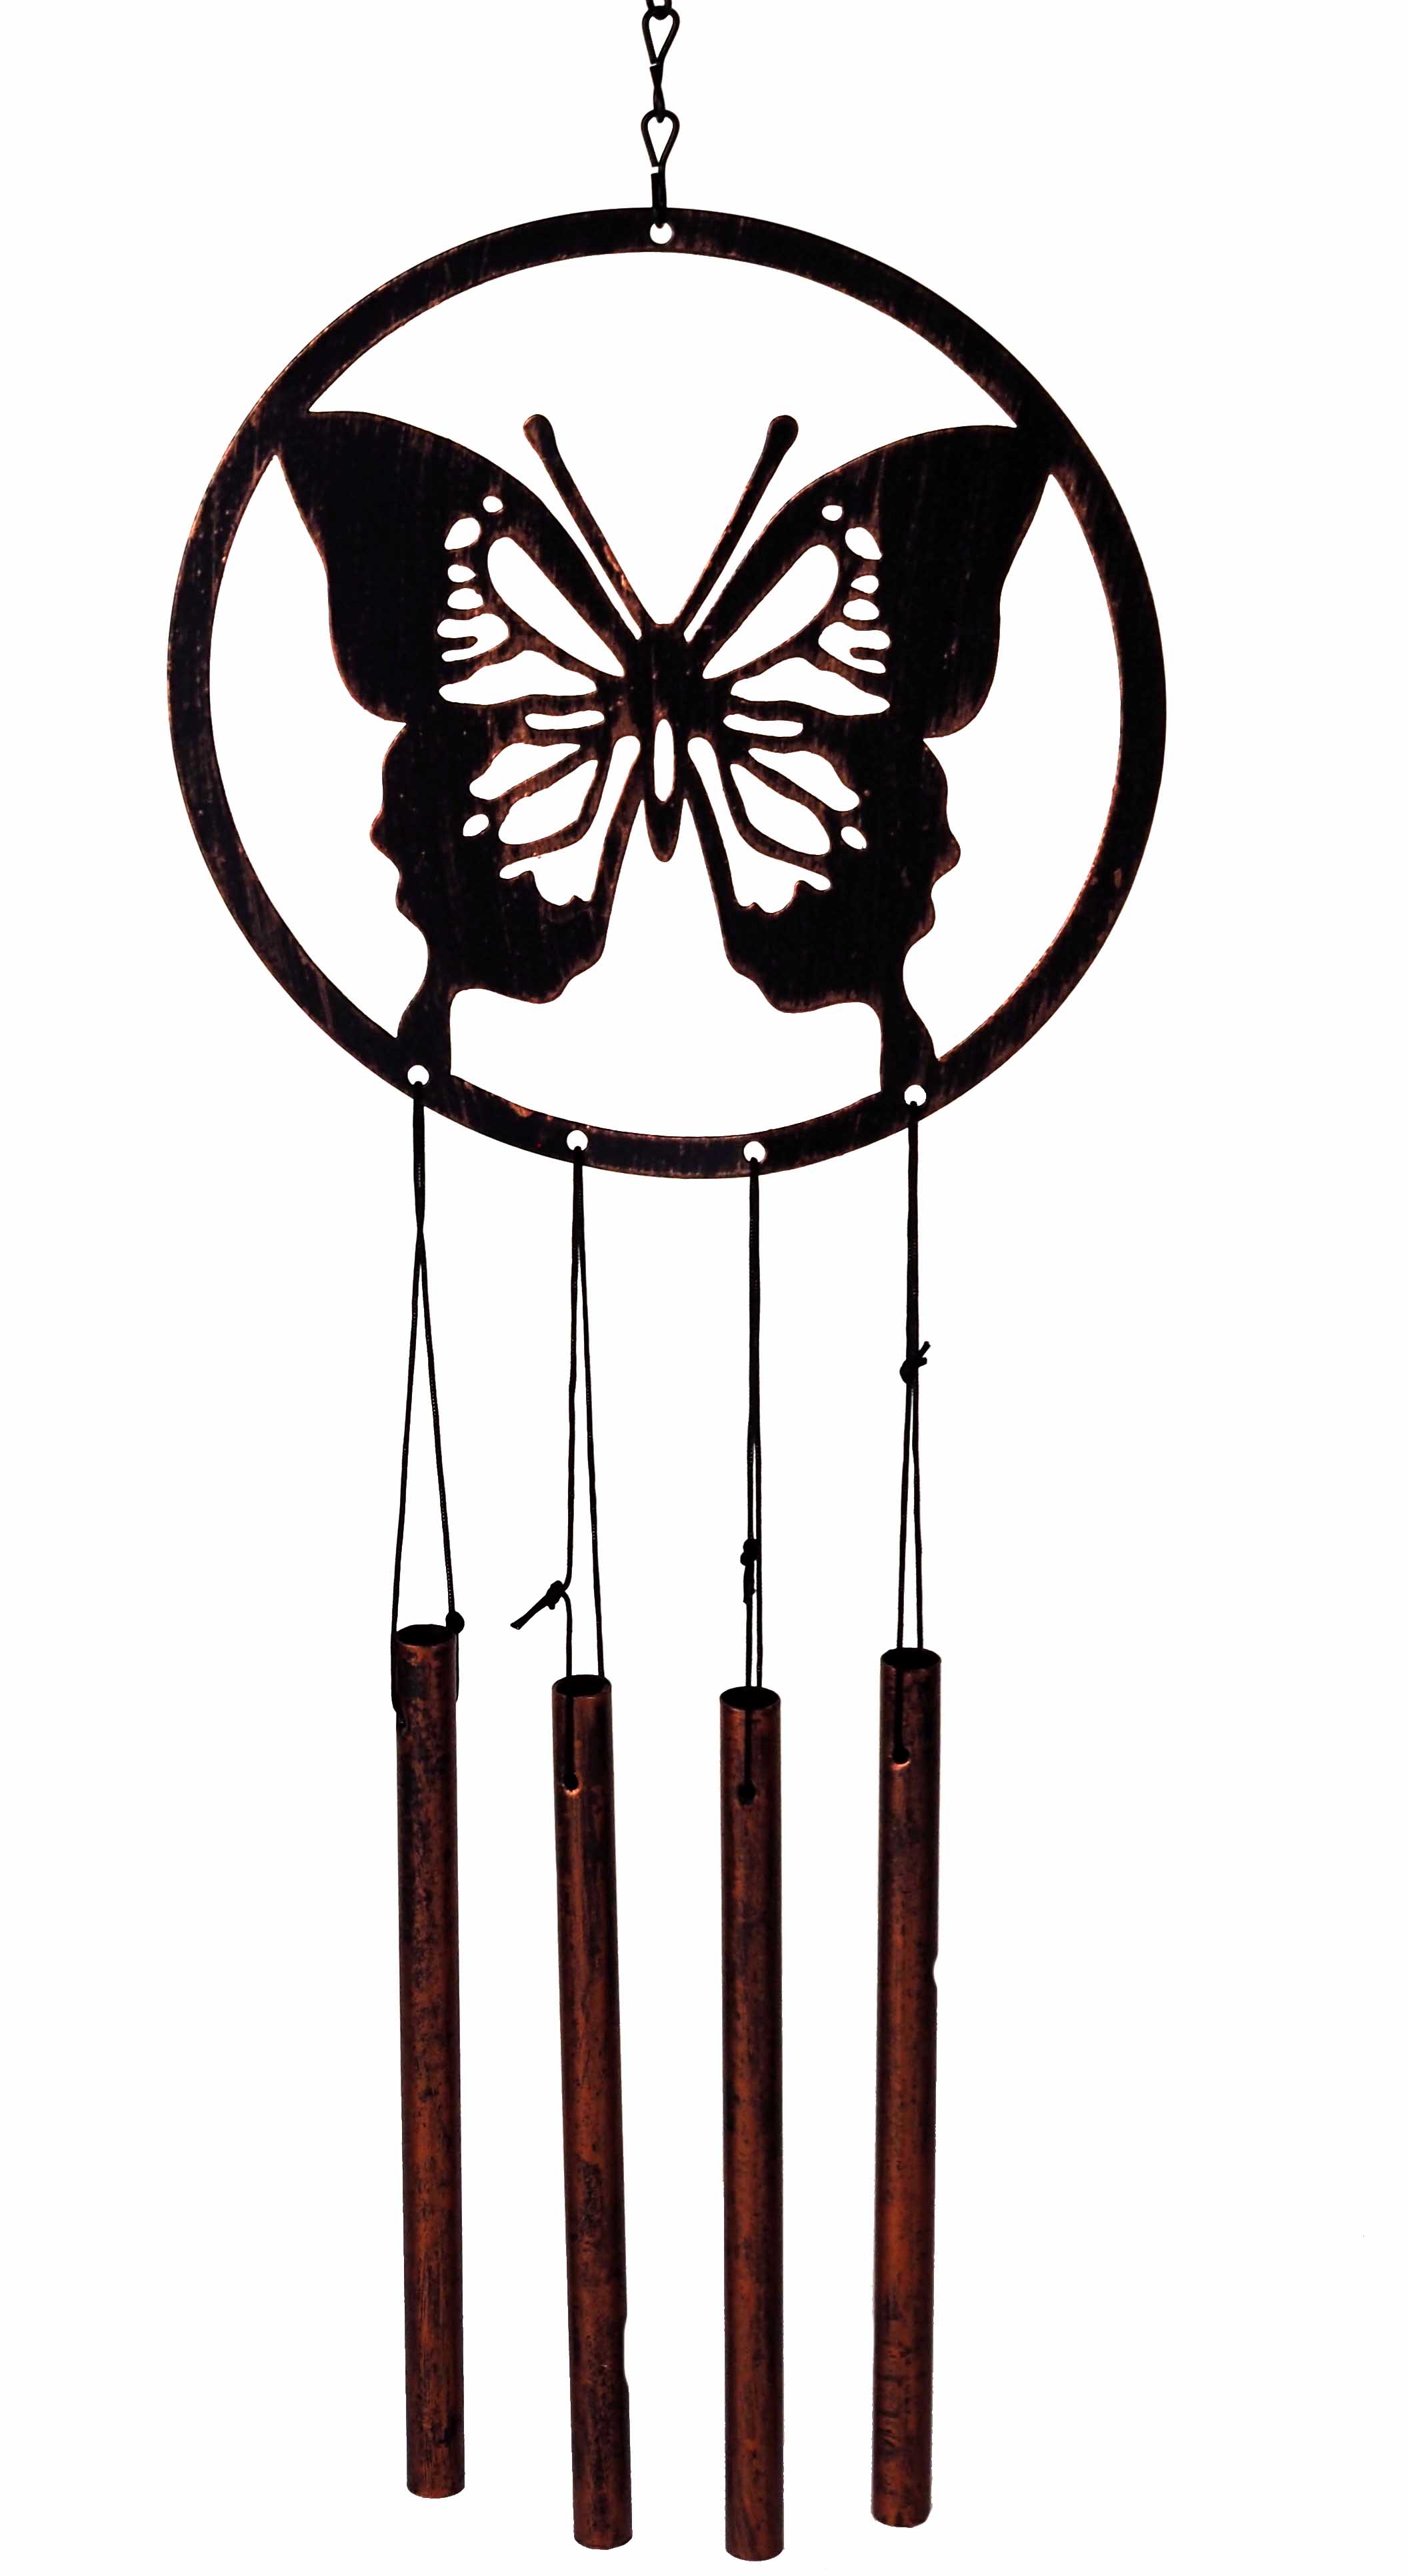 Butterfly Garden Wind Chime - Hanging Metal Mobile Ornament